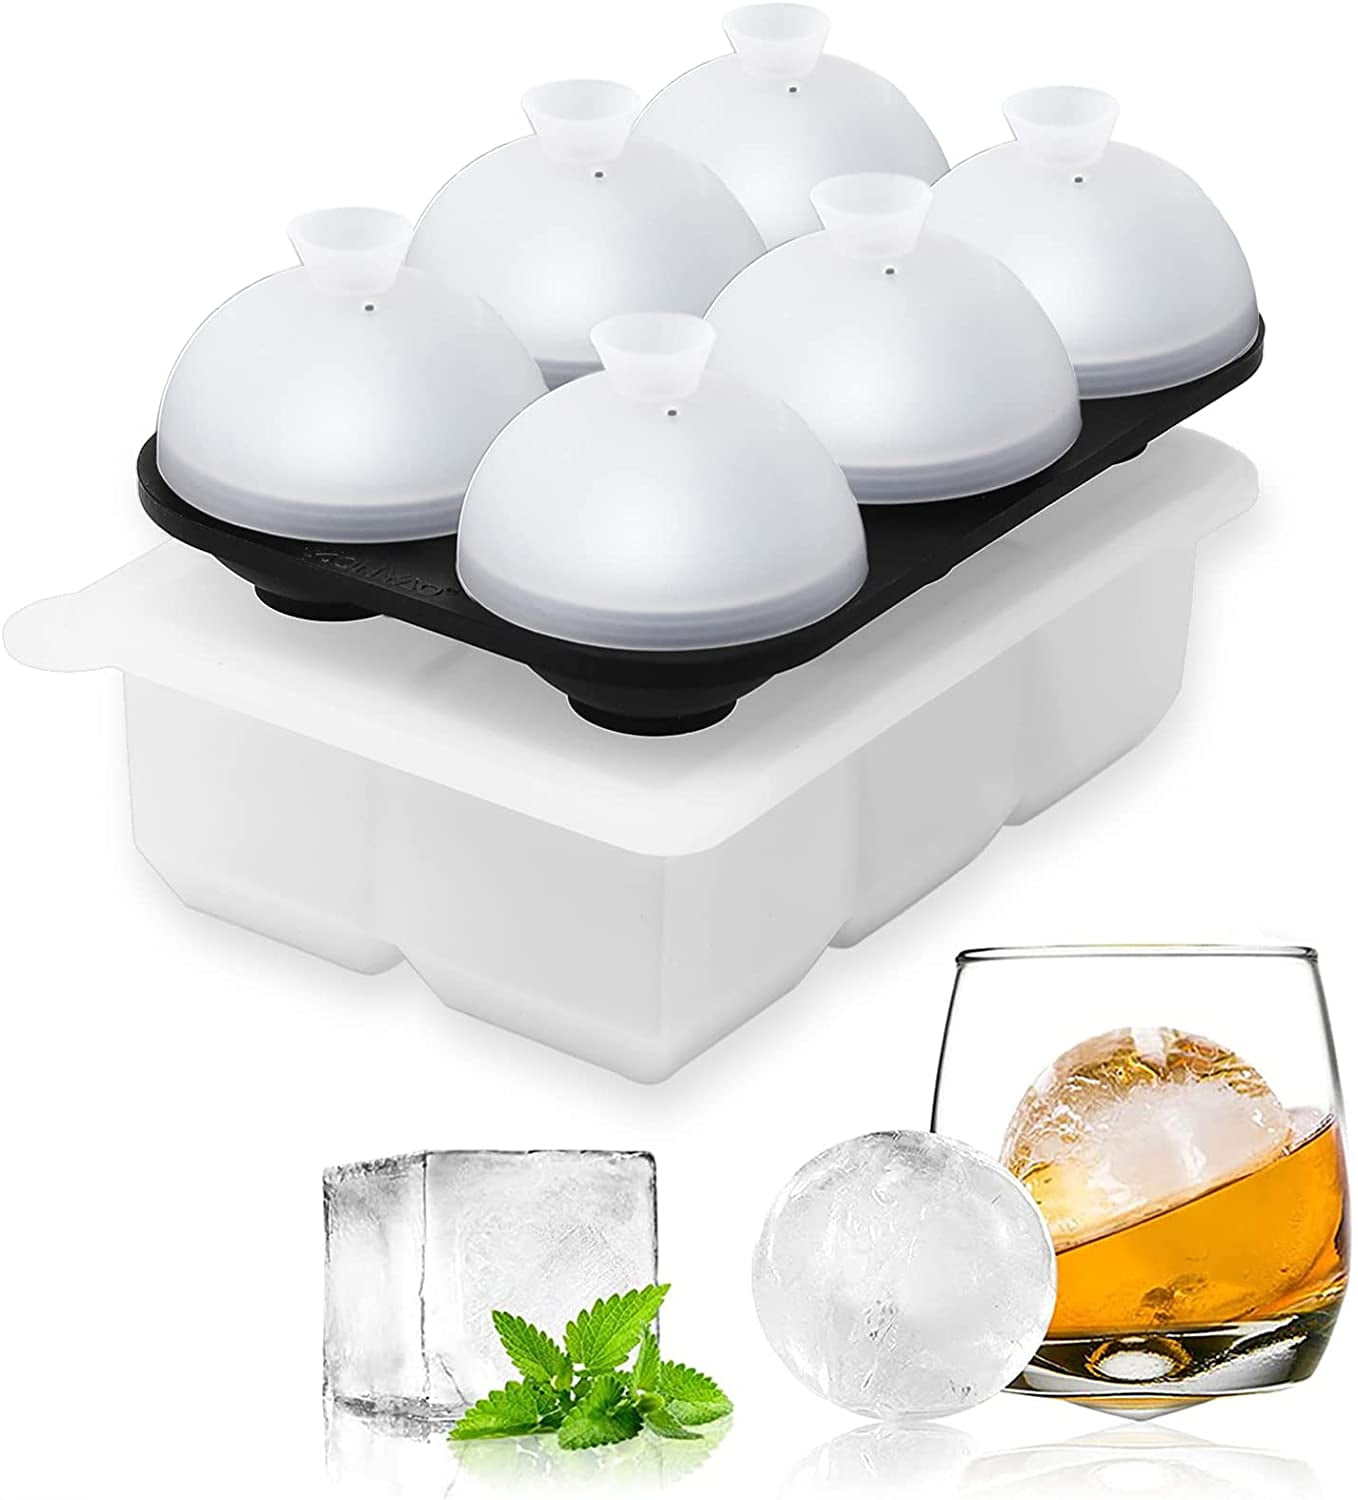 DclobTop Silicone Large Ice Cube Molds (Set of 3), 6 Ice Ball Maker Mold, 6 Square Ice Cube Mold ,4 Diamond, Reusable Whiskey Ice Mold, Ice Molds for